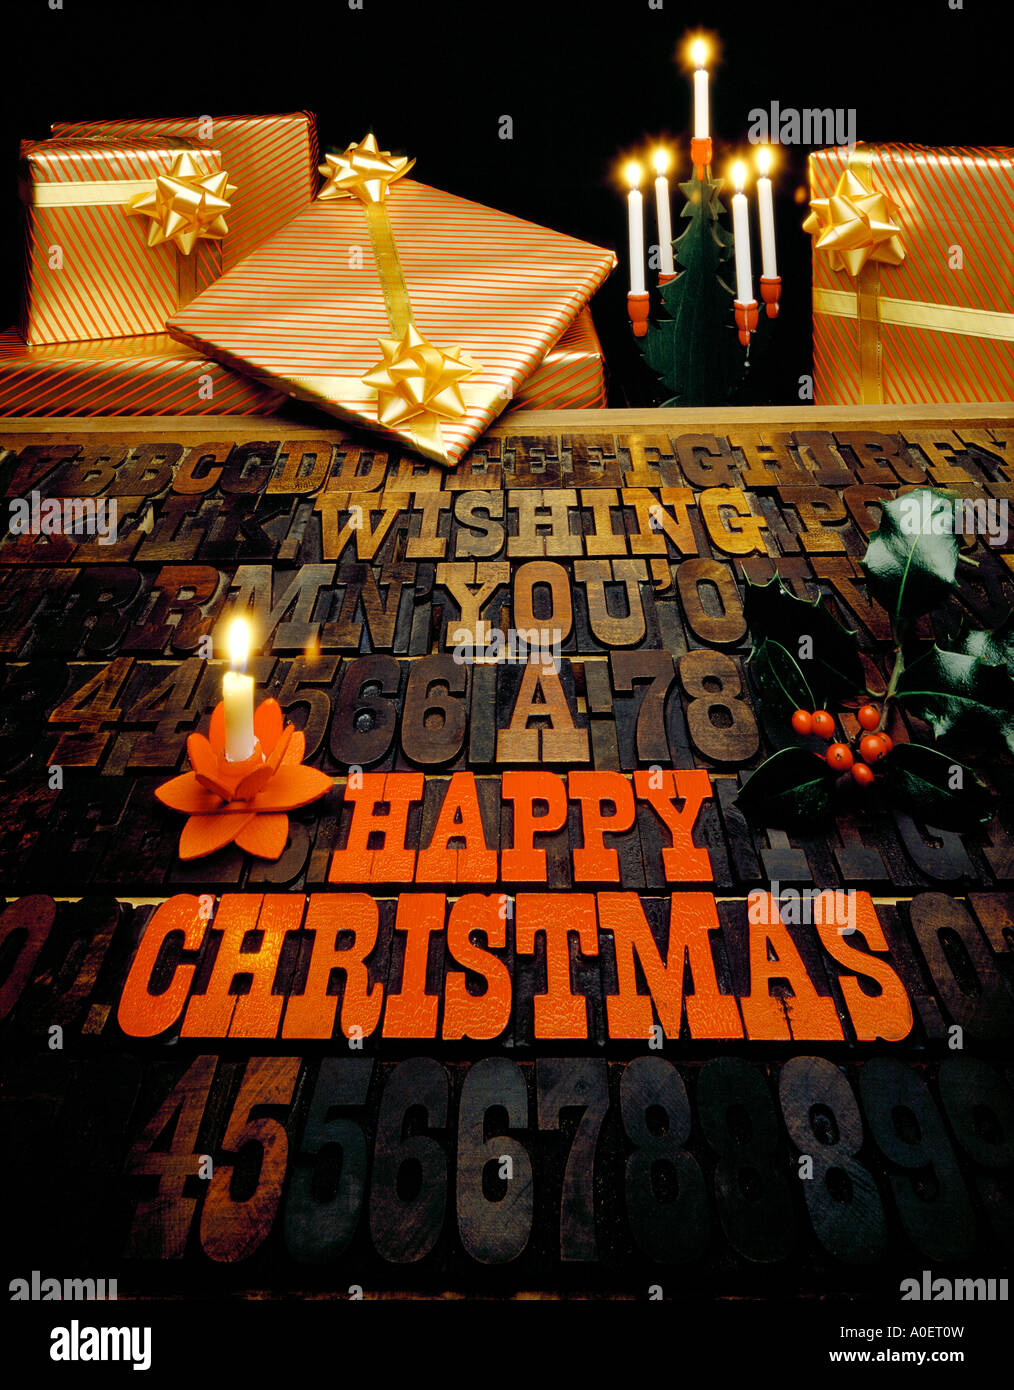 CHRISTMAS GREETING MADE UP OF OLD WOODEN TYPE FACE LETTERS Stock Photo